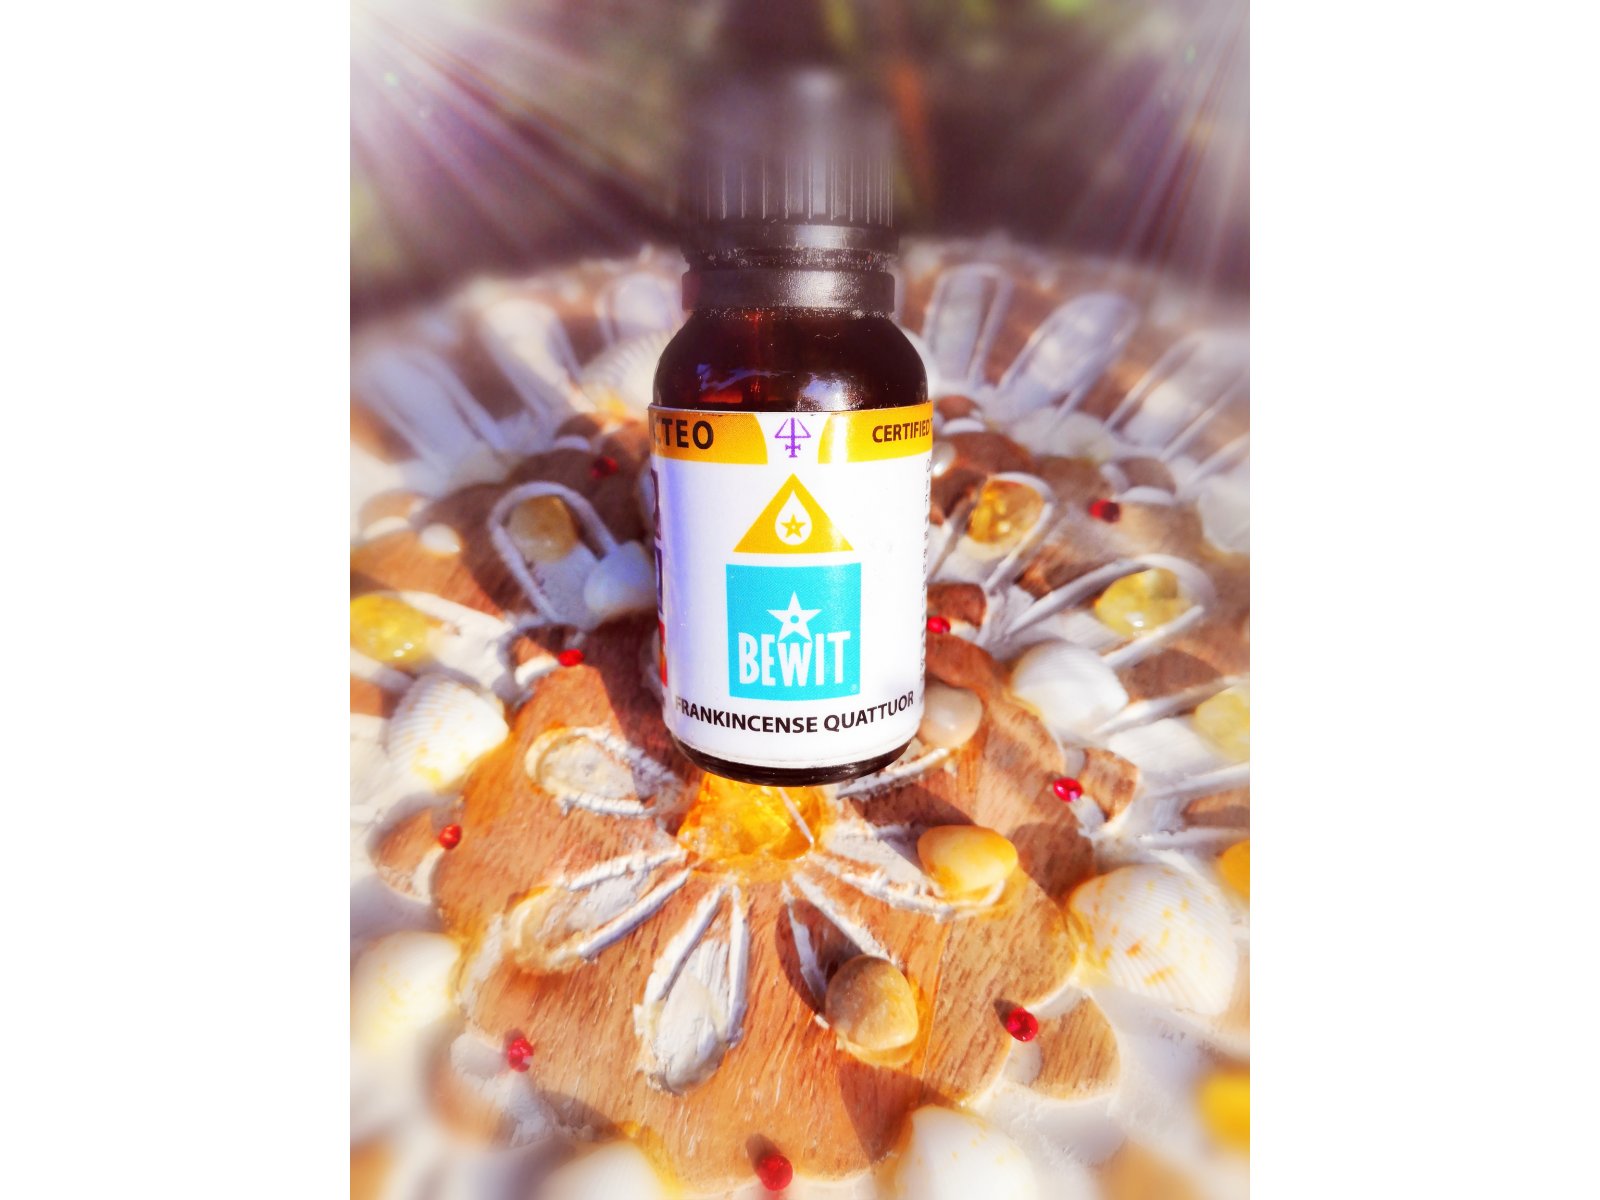 BEWIT Frankincense Quattuor - 100% natural essential oil blend in CTEO® quality - 3